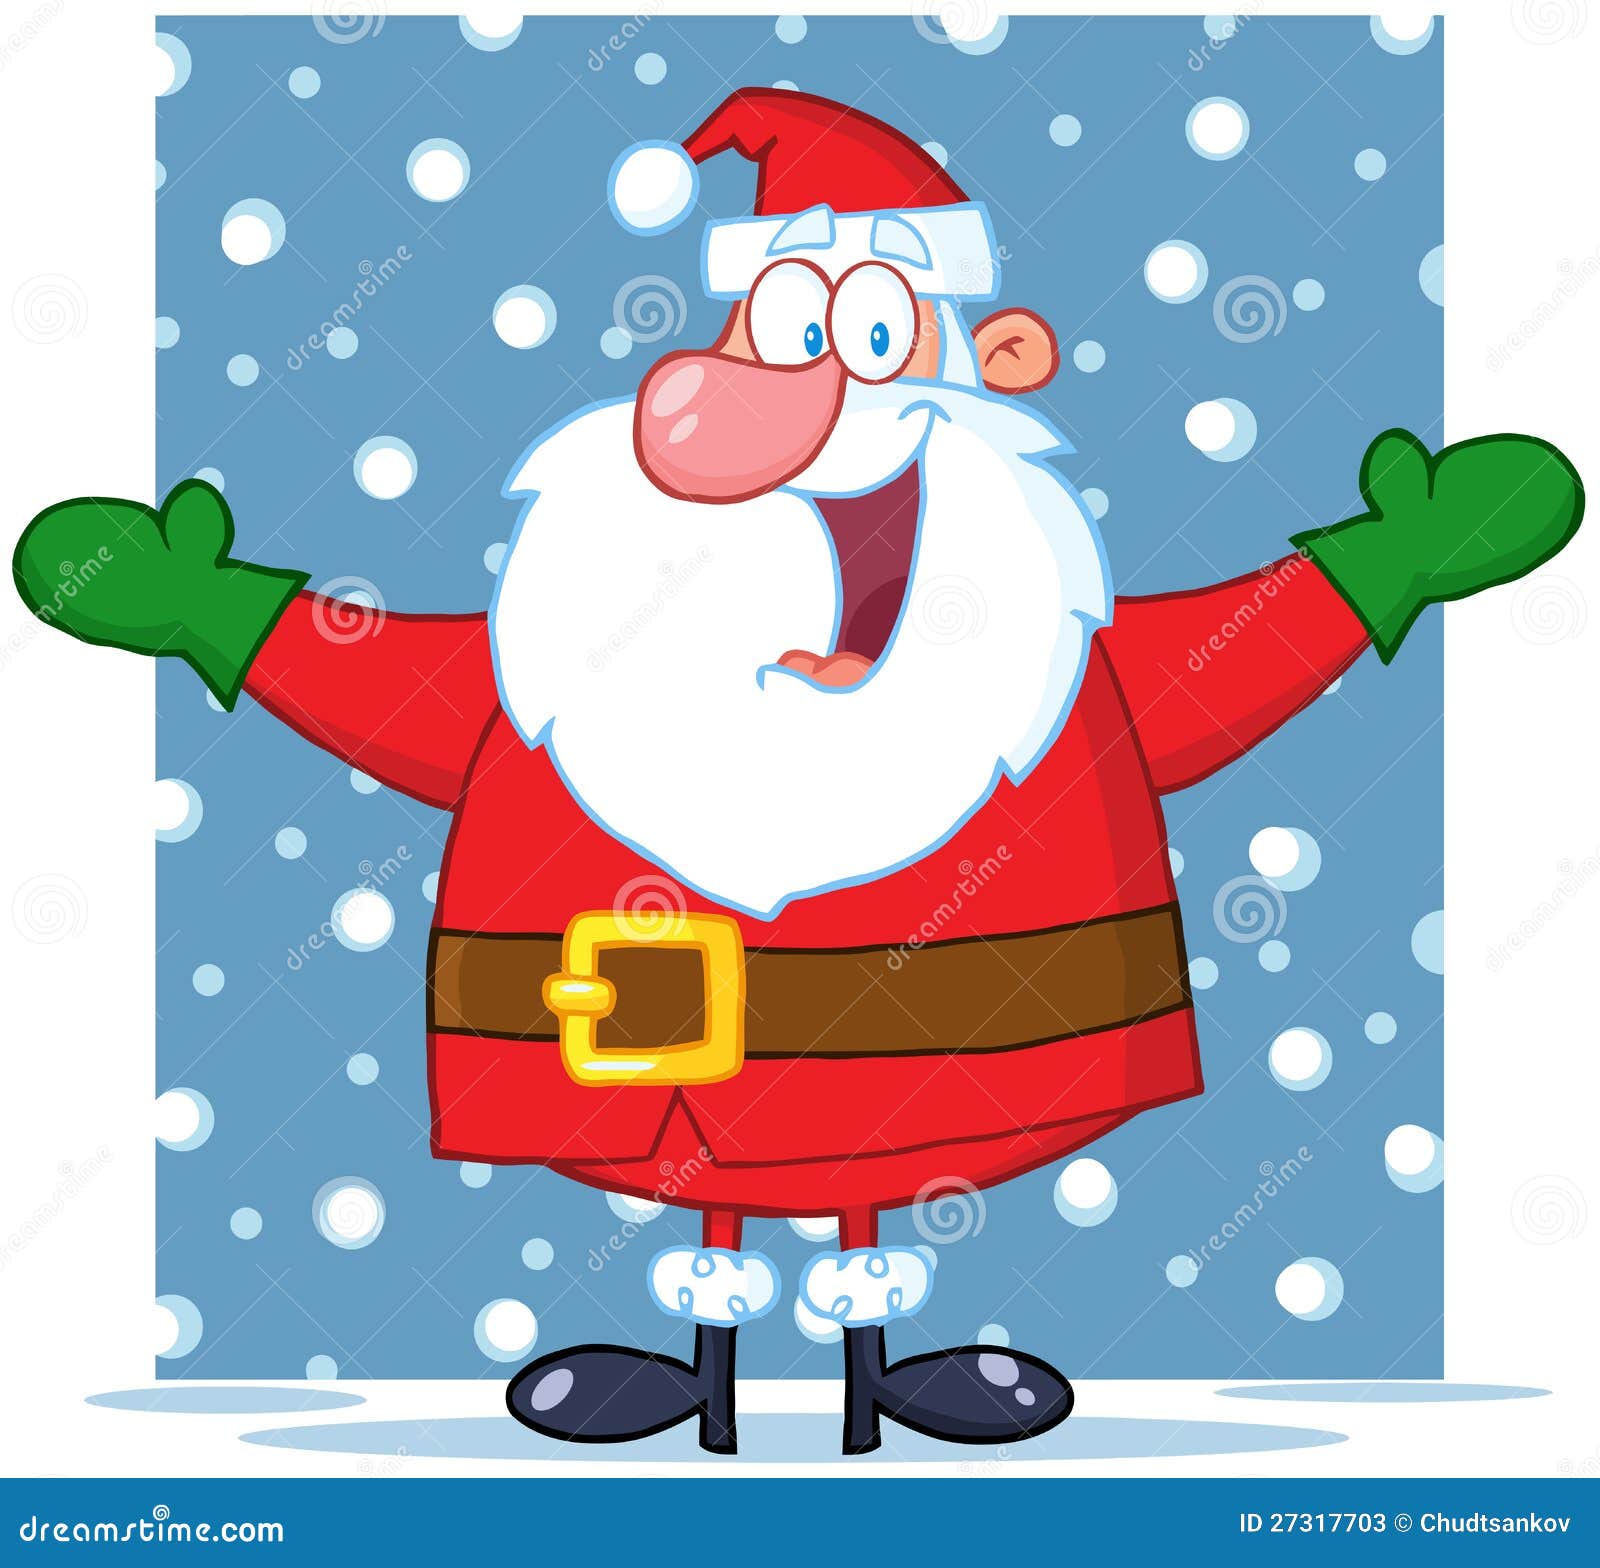 jolly santa claus with open arms